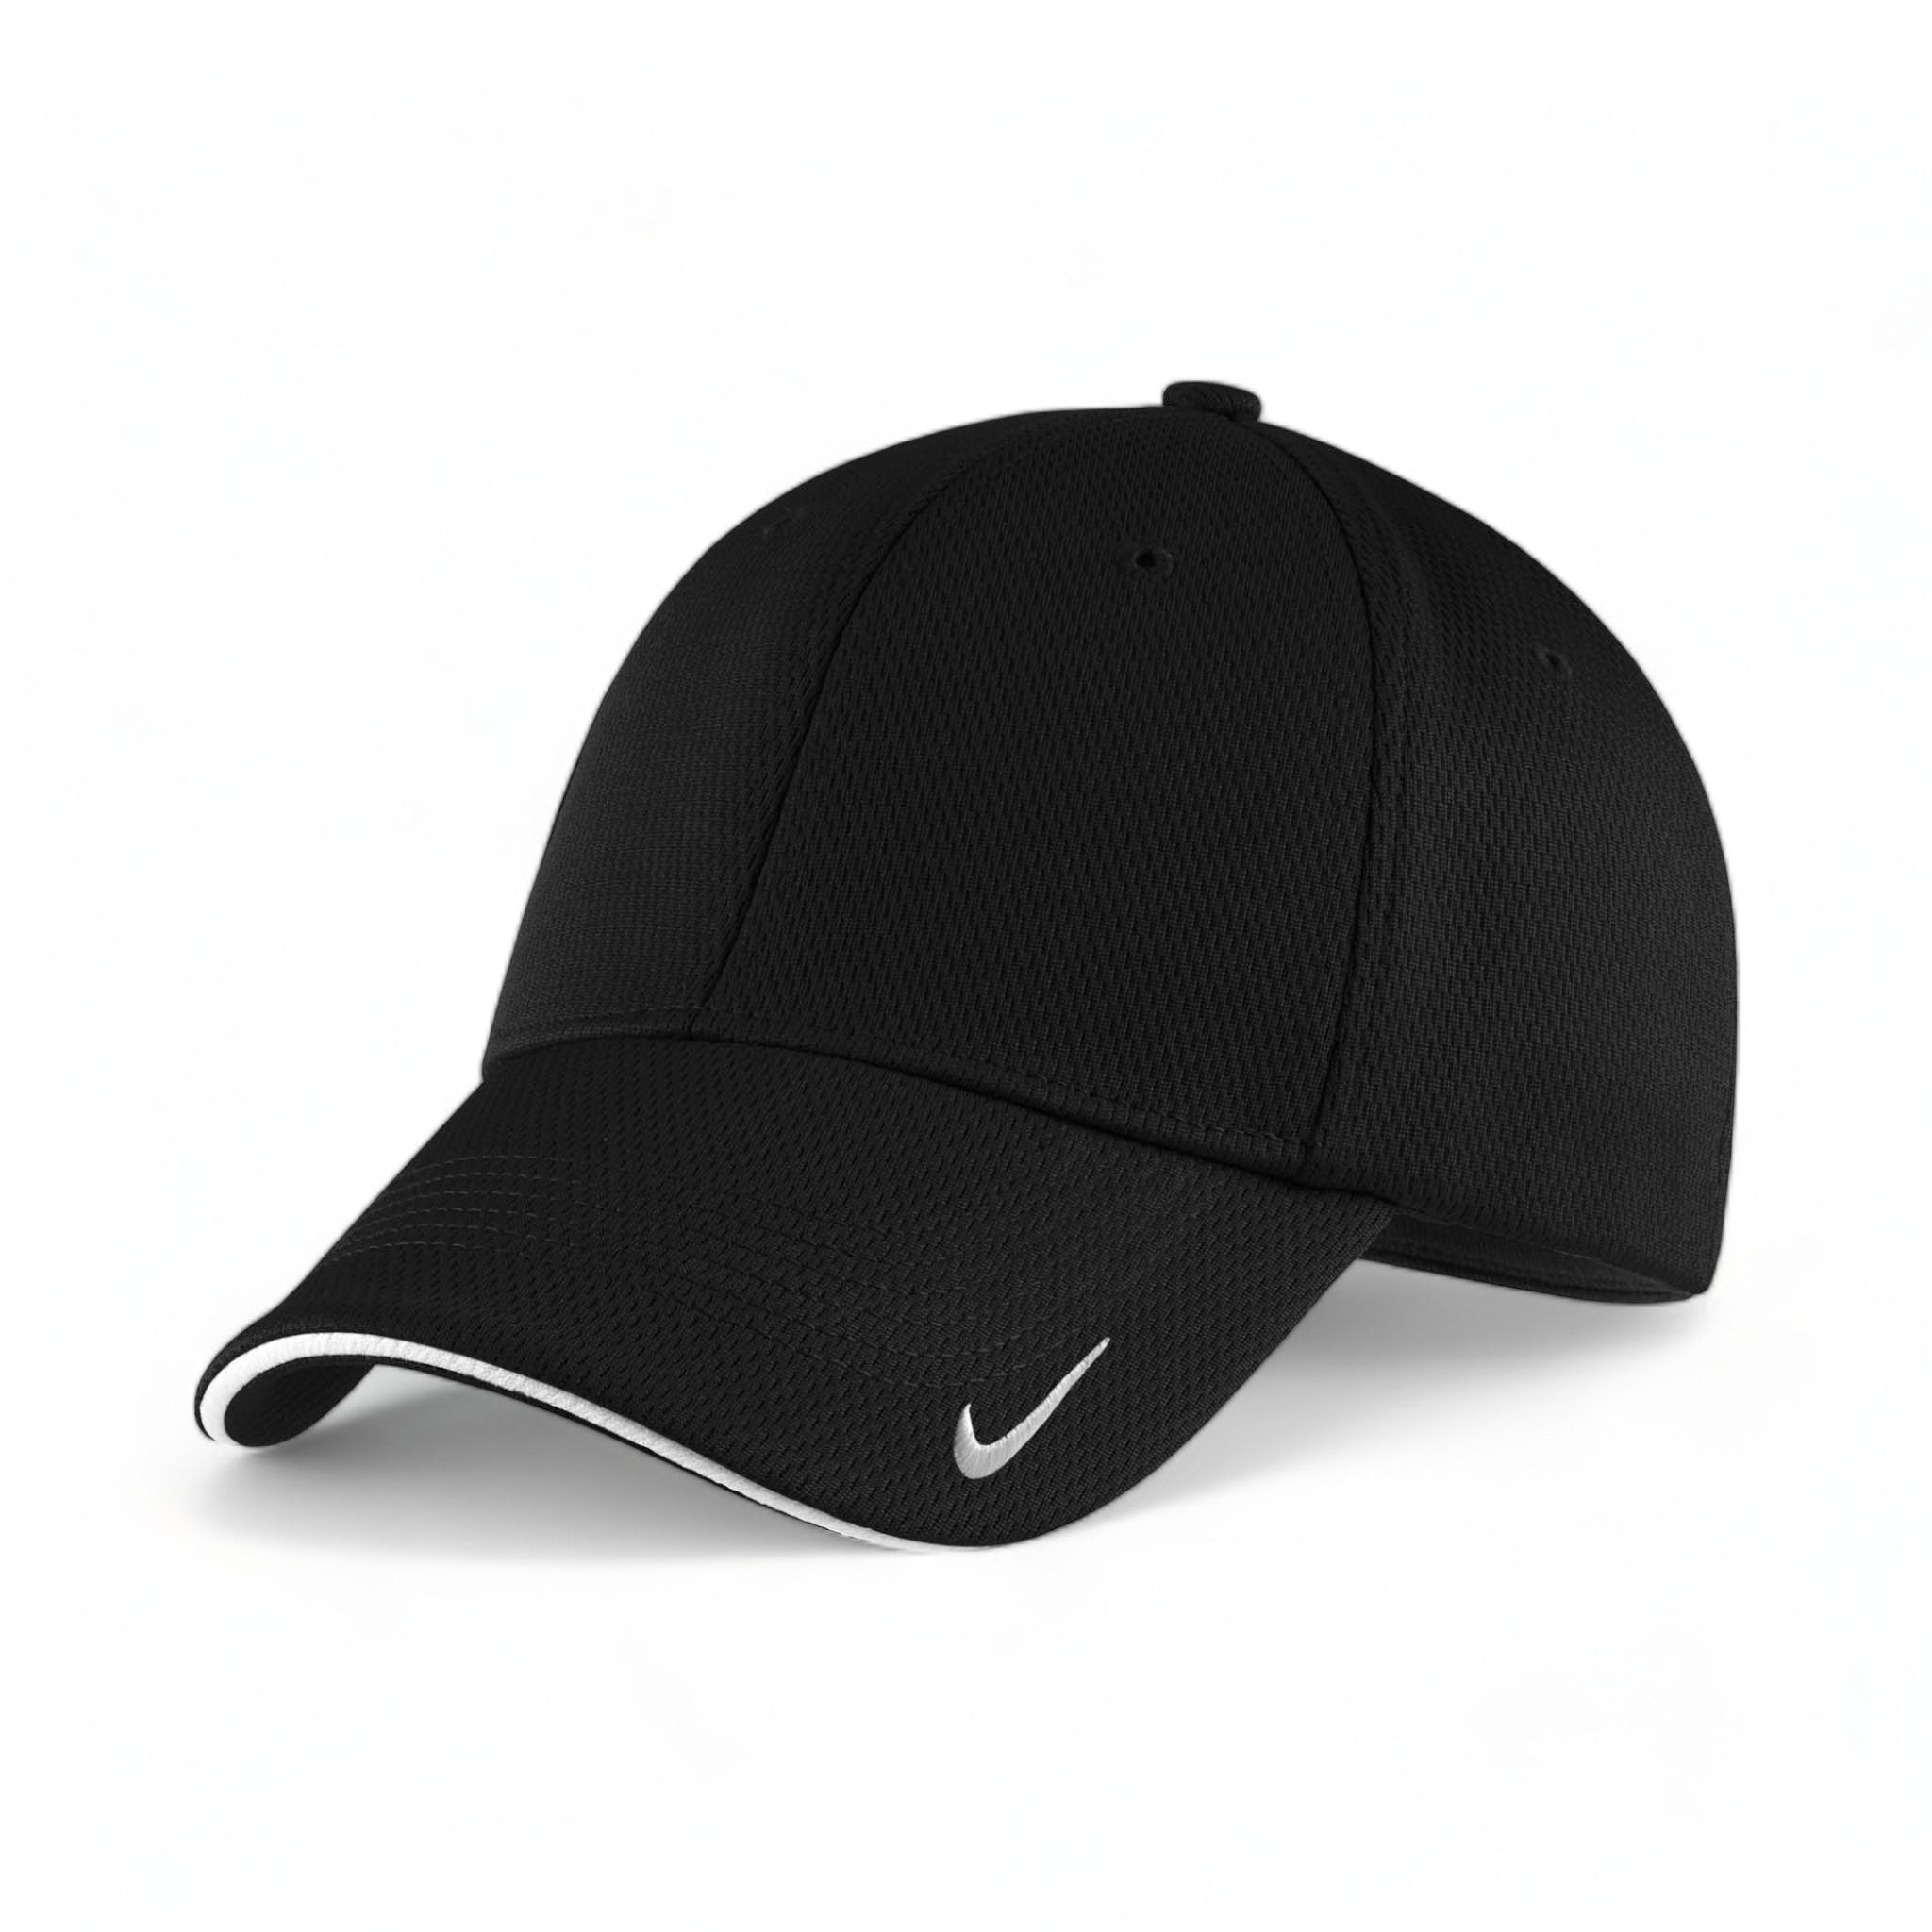 Side view of Nike NKFD9718 custom hat in black and white